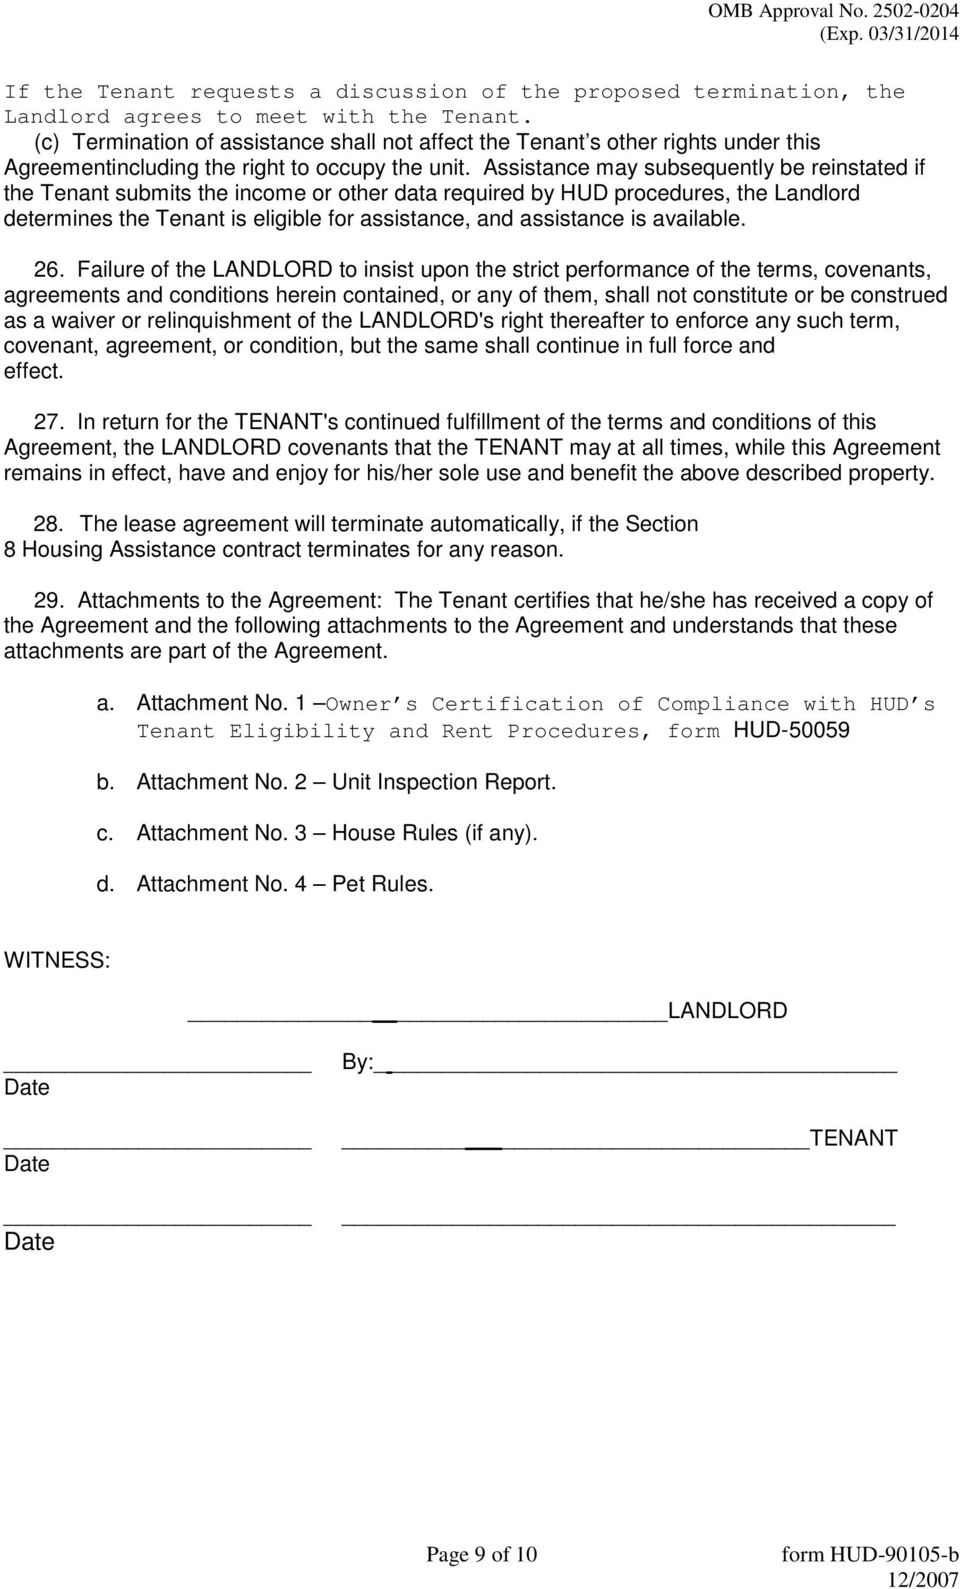 Hud Use Agreement Hud Project Number As Landlord And As Tenant Pdf